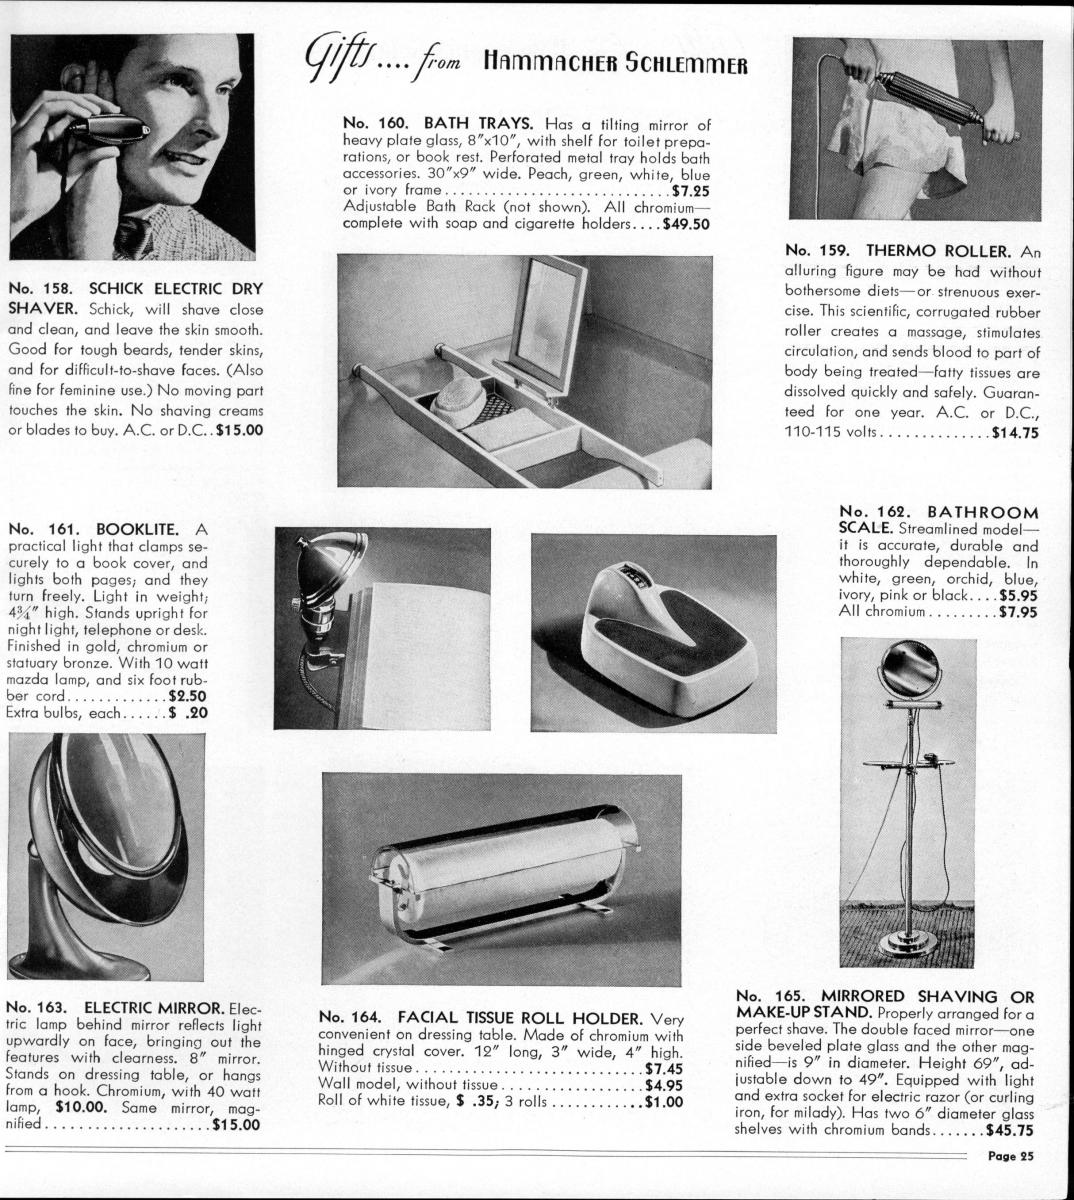 Hammacher, Schlemmer & Co. The cleverest Gifts in New York, 1936